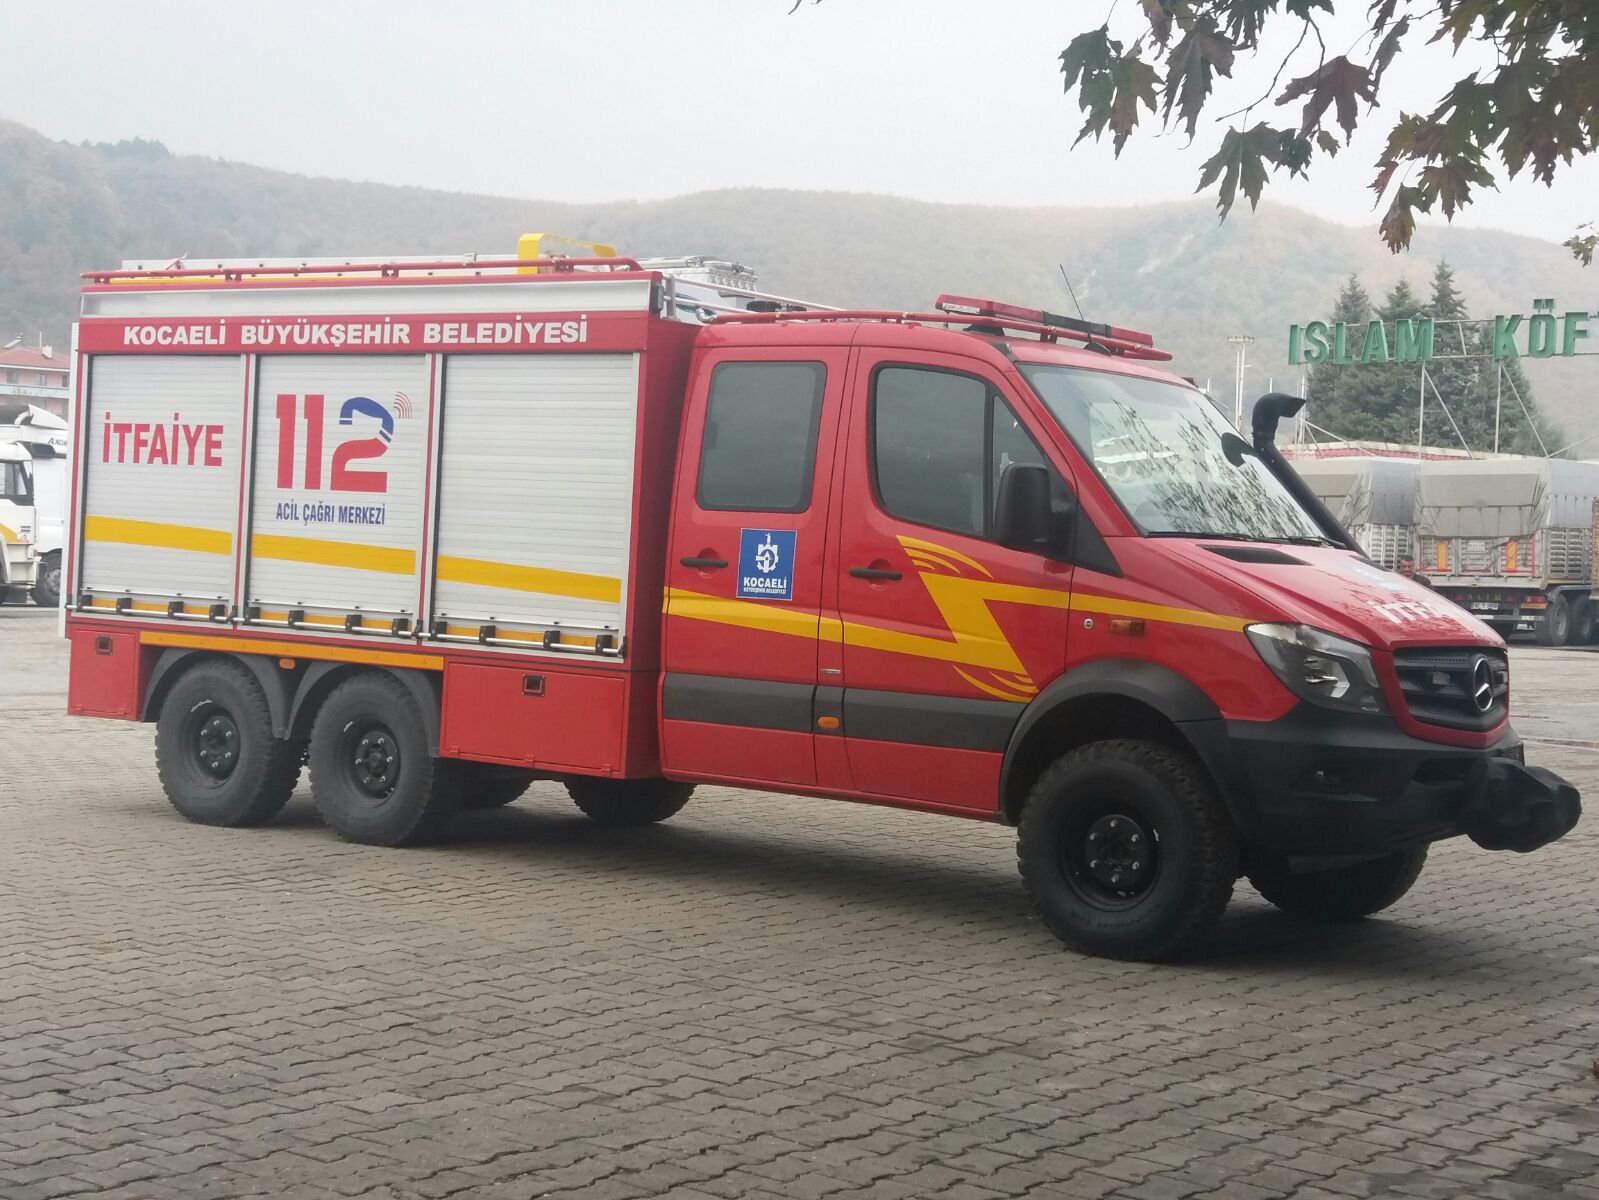 Kocaeli Fire Department Delivery